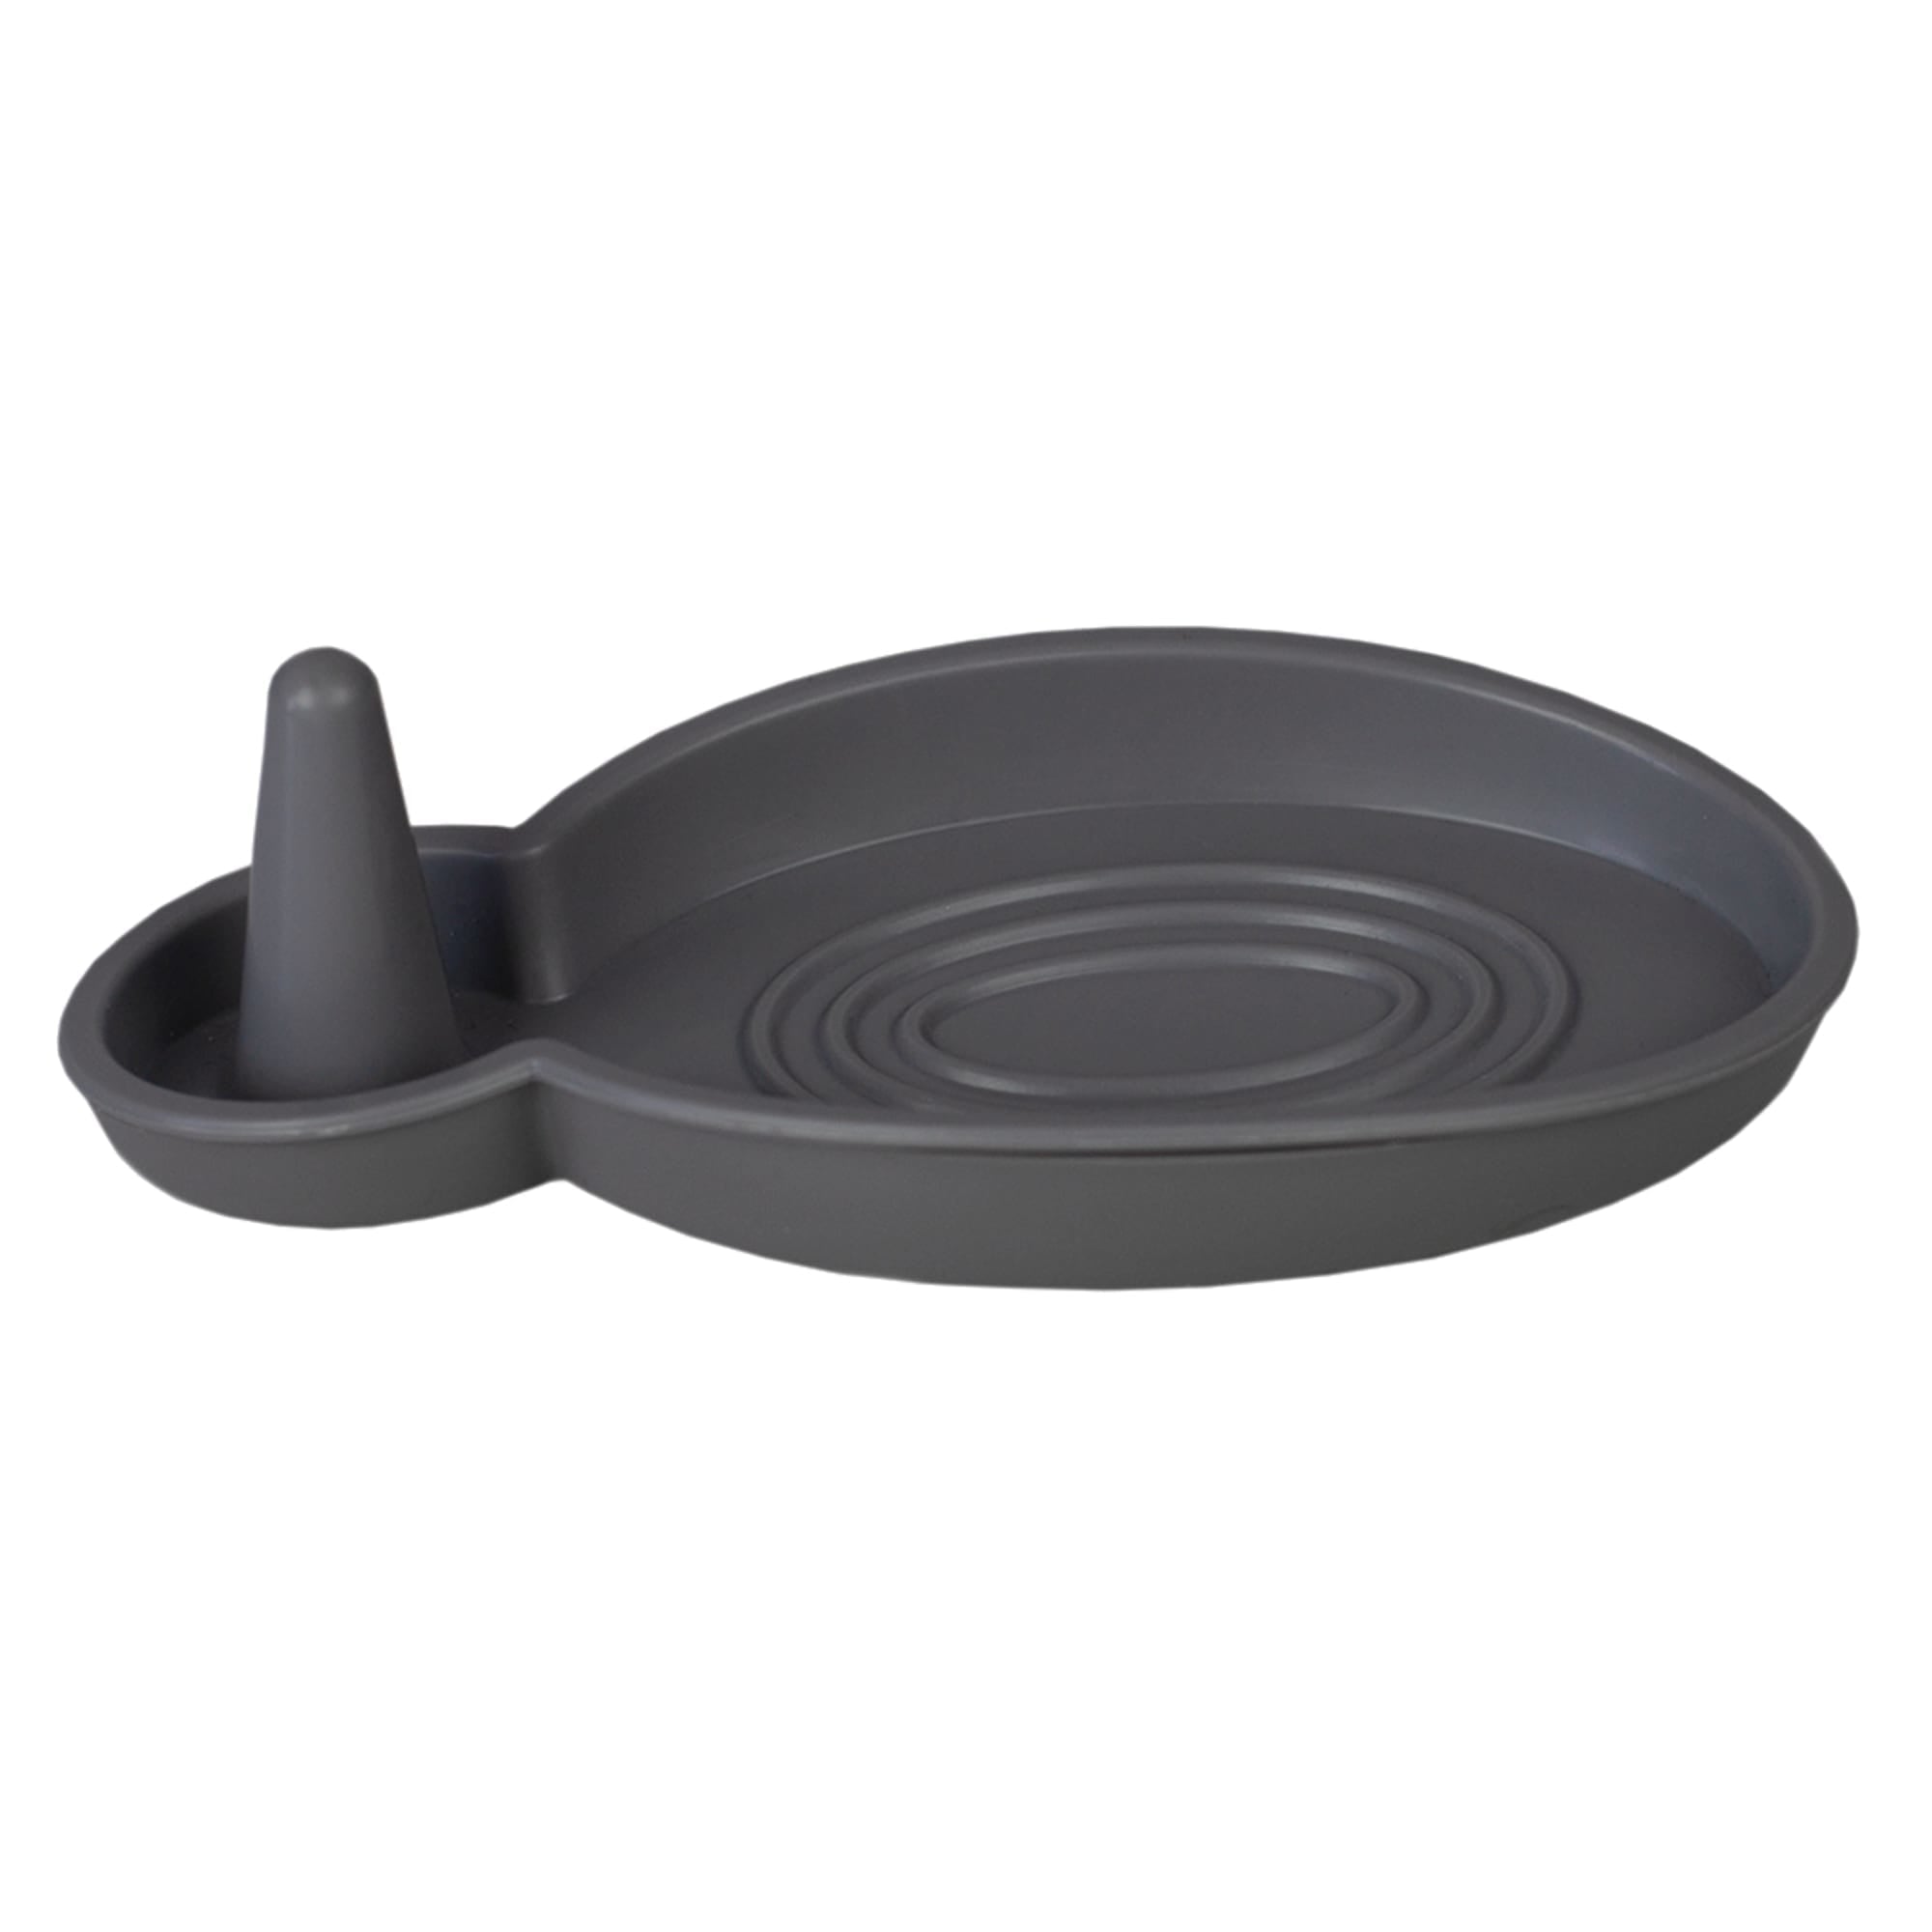 Home Basics Silicone Soap Dish and Ring Holder, Grey $1.50 EACH, CASE PACK OF 24